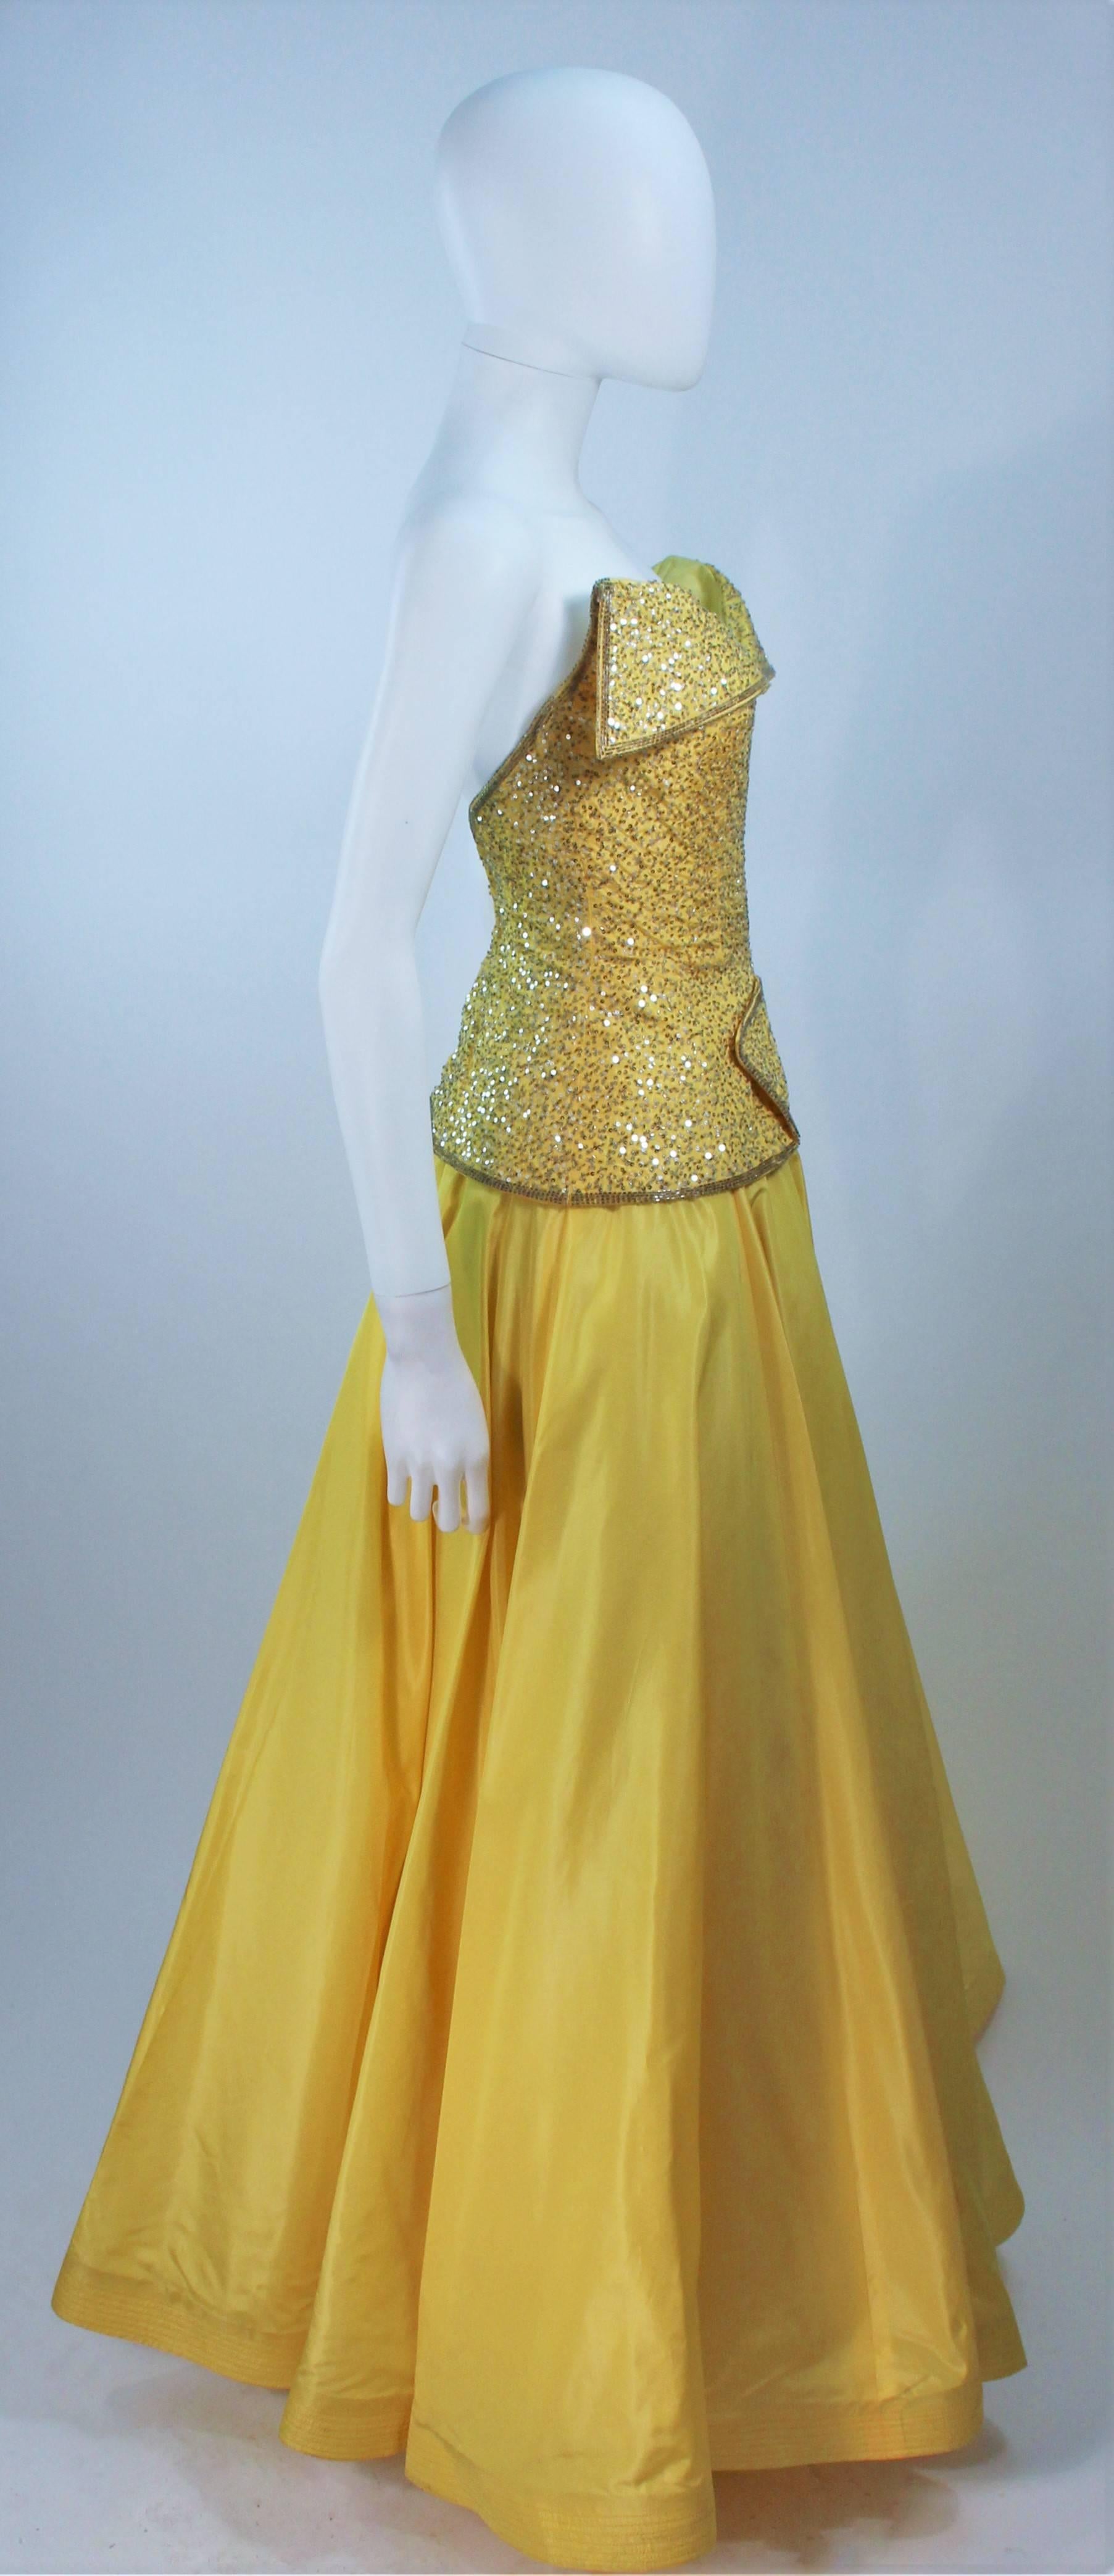 MURRAY ARBEID Yellow Embellished Full Length Strapless Gown Size 2-4 In Excellent Condition For Sale In Los Angeles, CA